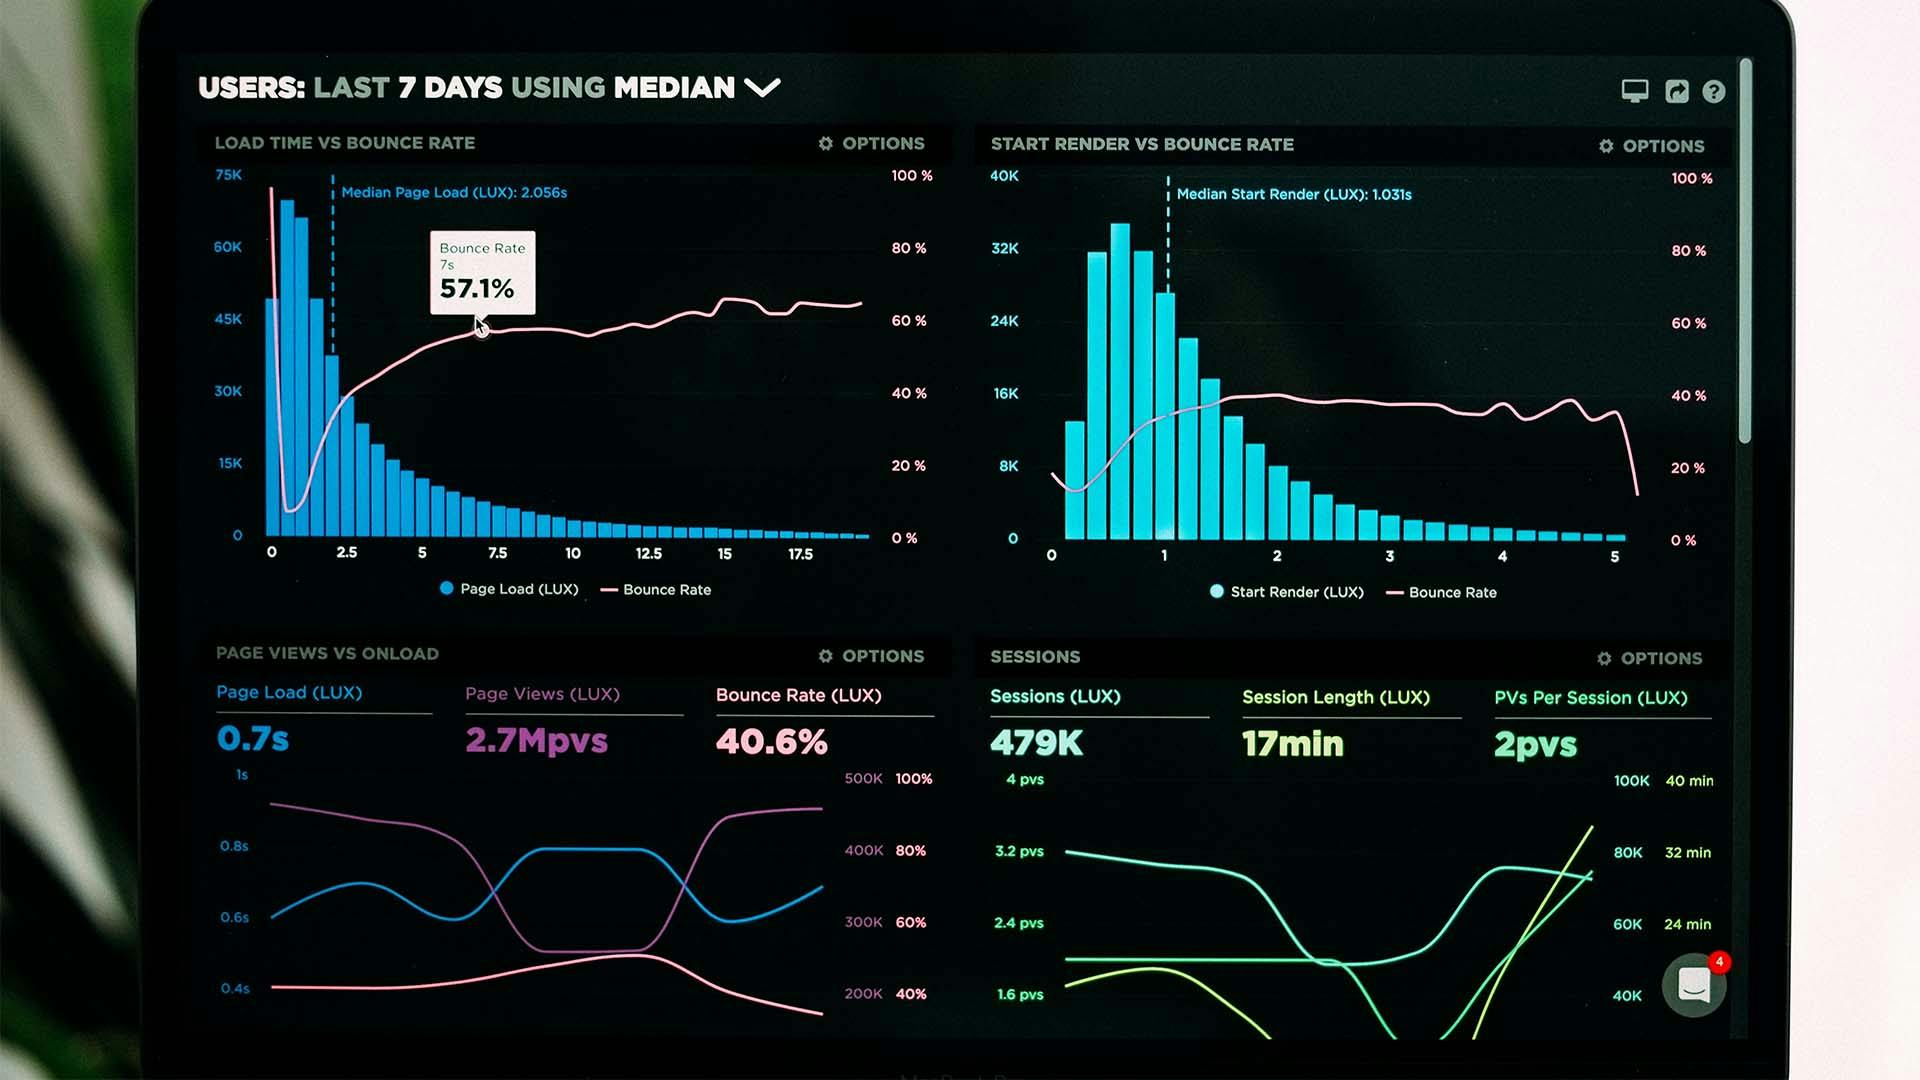 graphs of performance analytics on a laptop screen showing SEO metrics like Bounce Rate, Load time, and Session Length